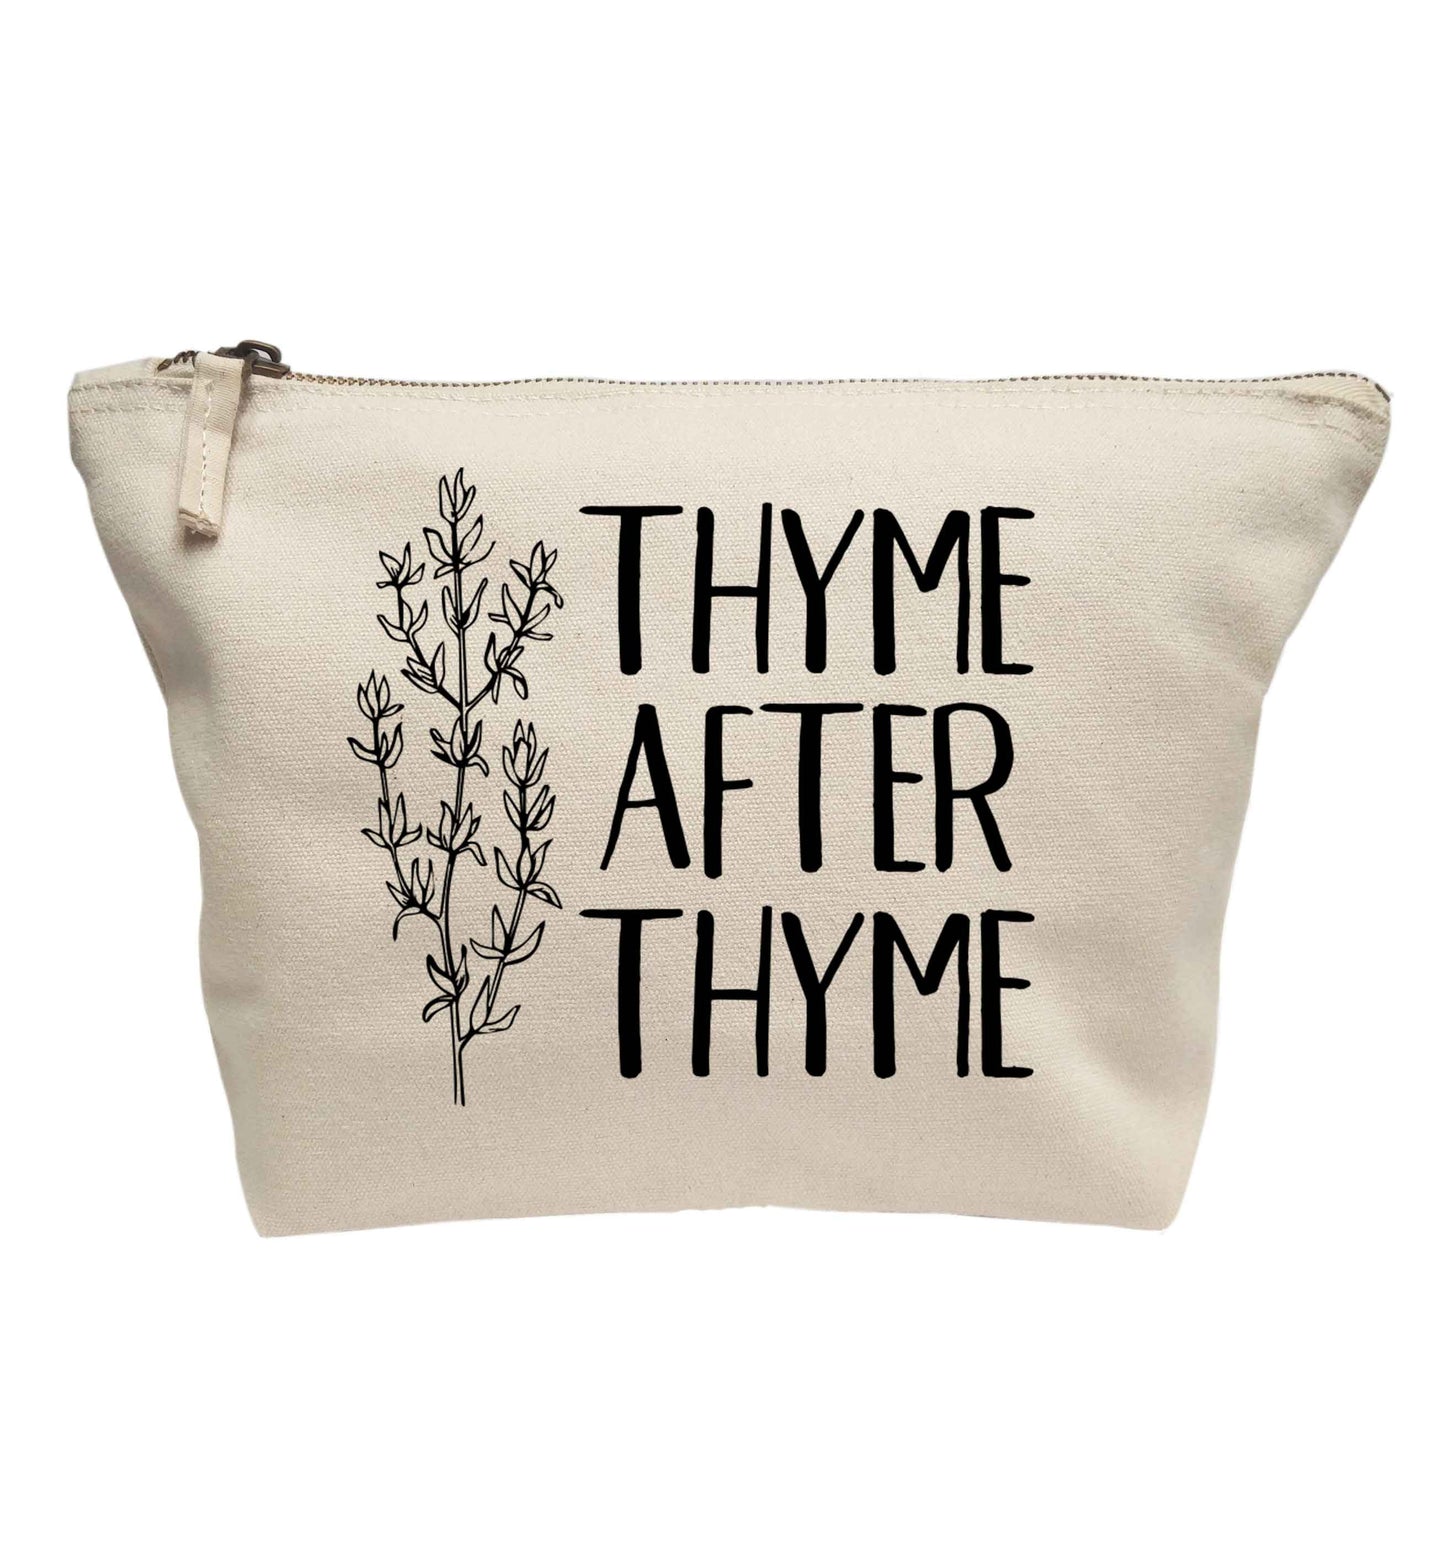 Thyme after thyme | makeup / wash bag